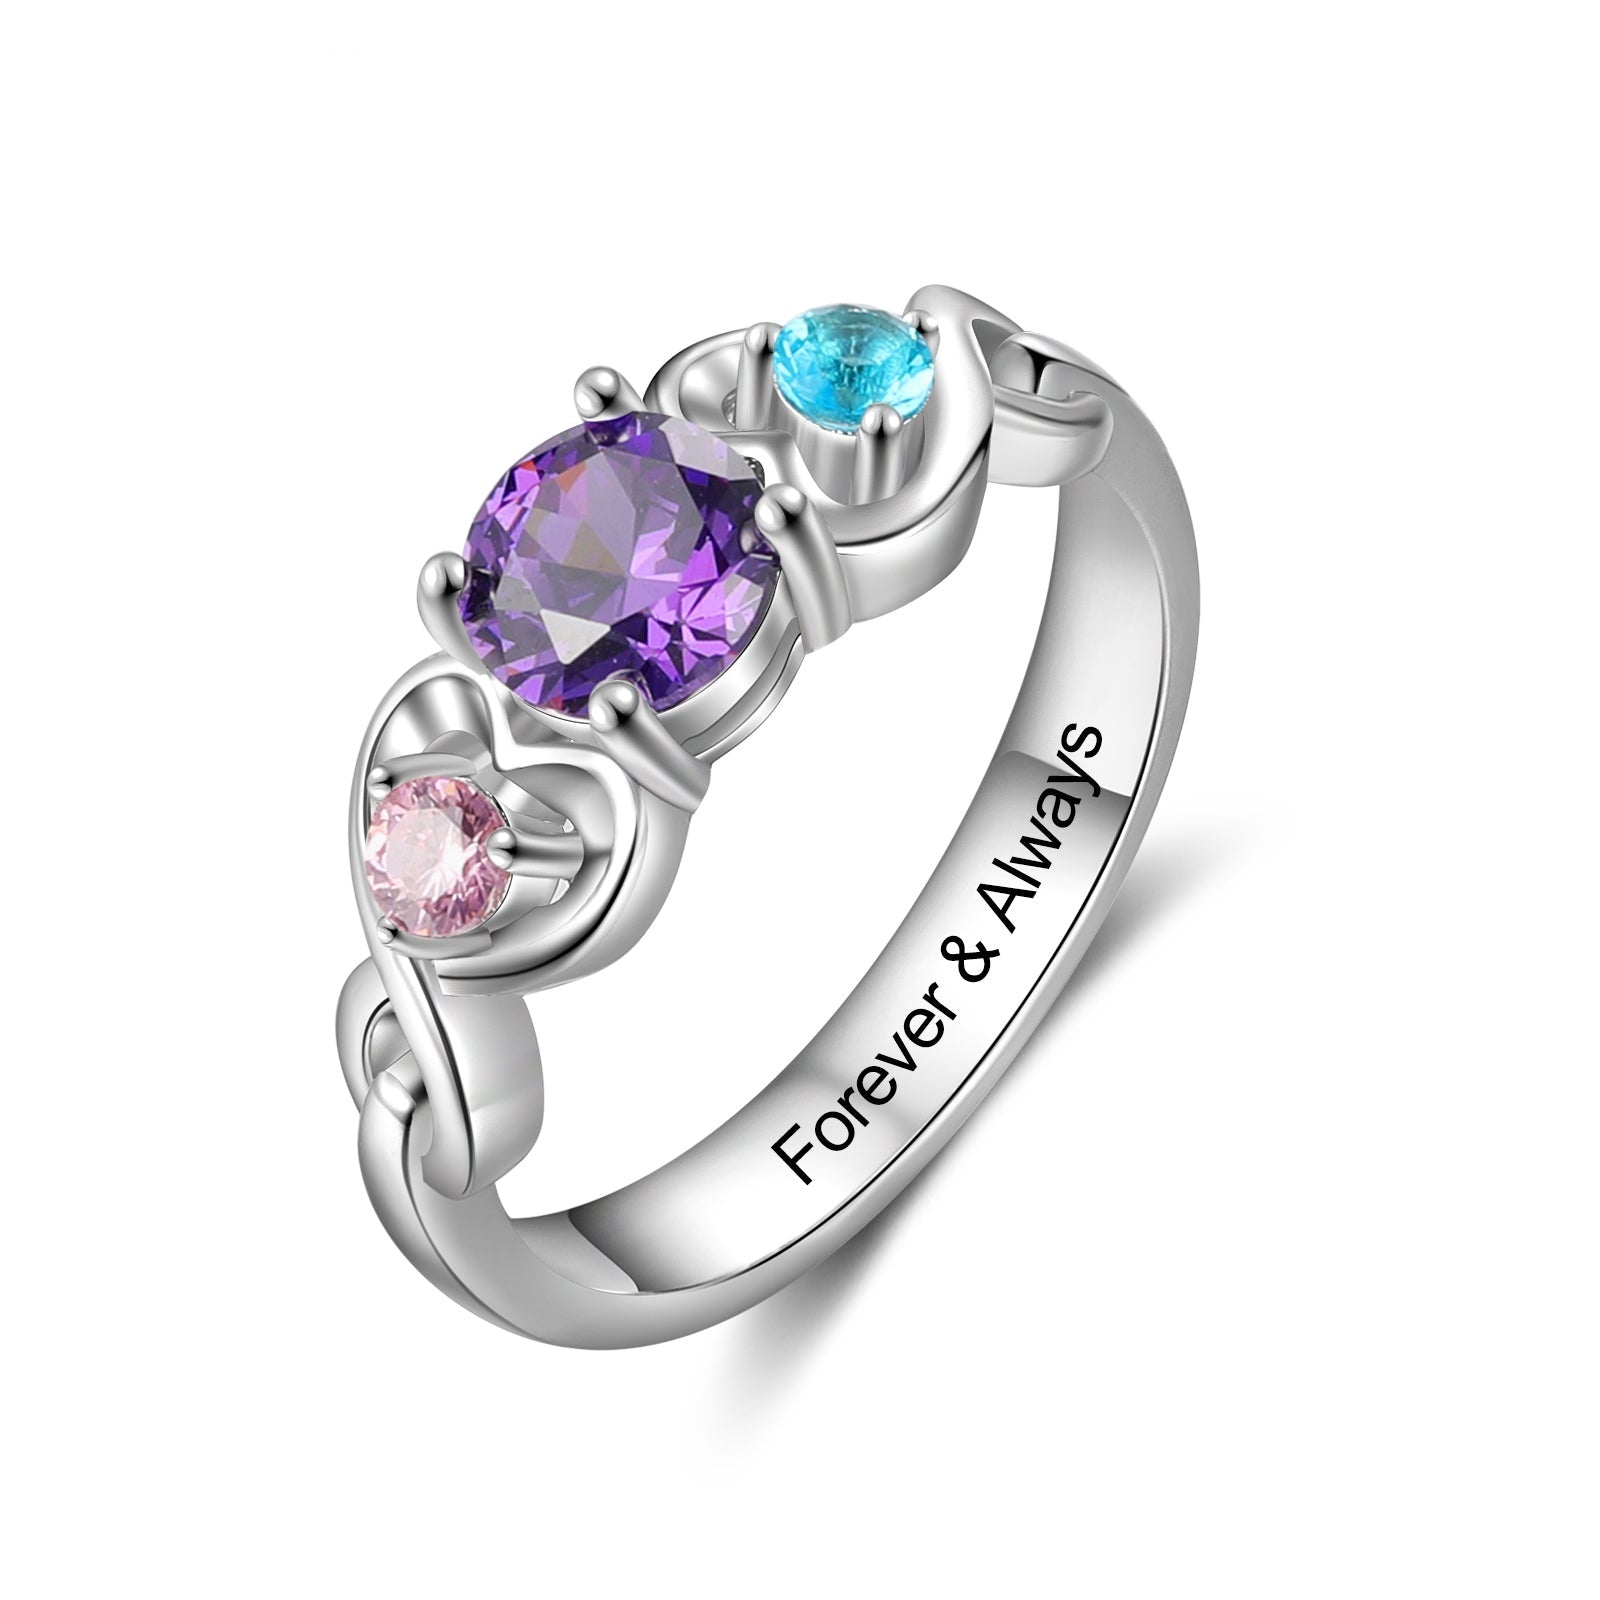 Personalized Engraving Engagement 12 Colors Birthstone Ring